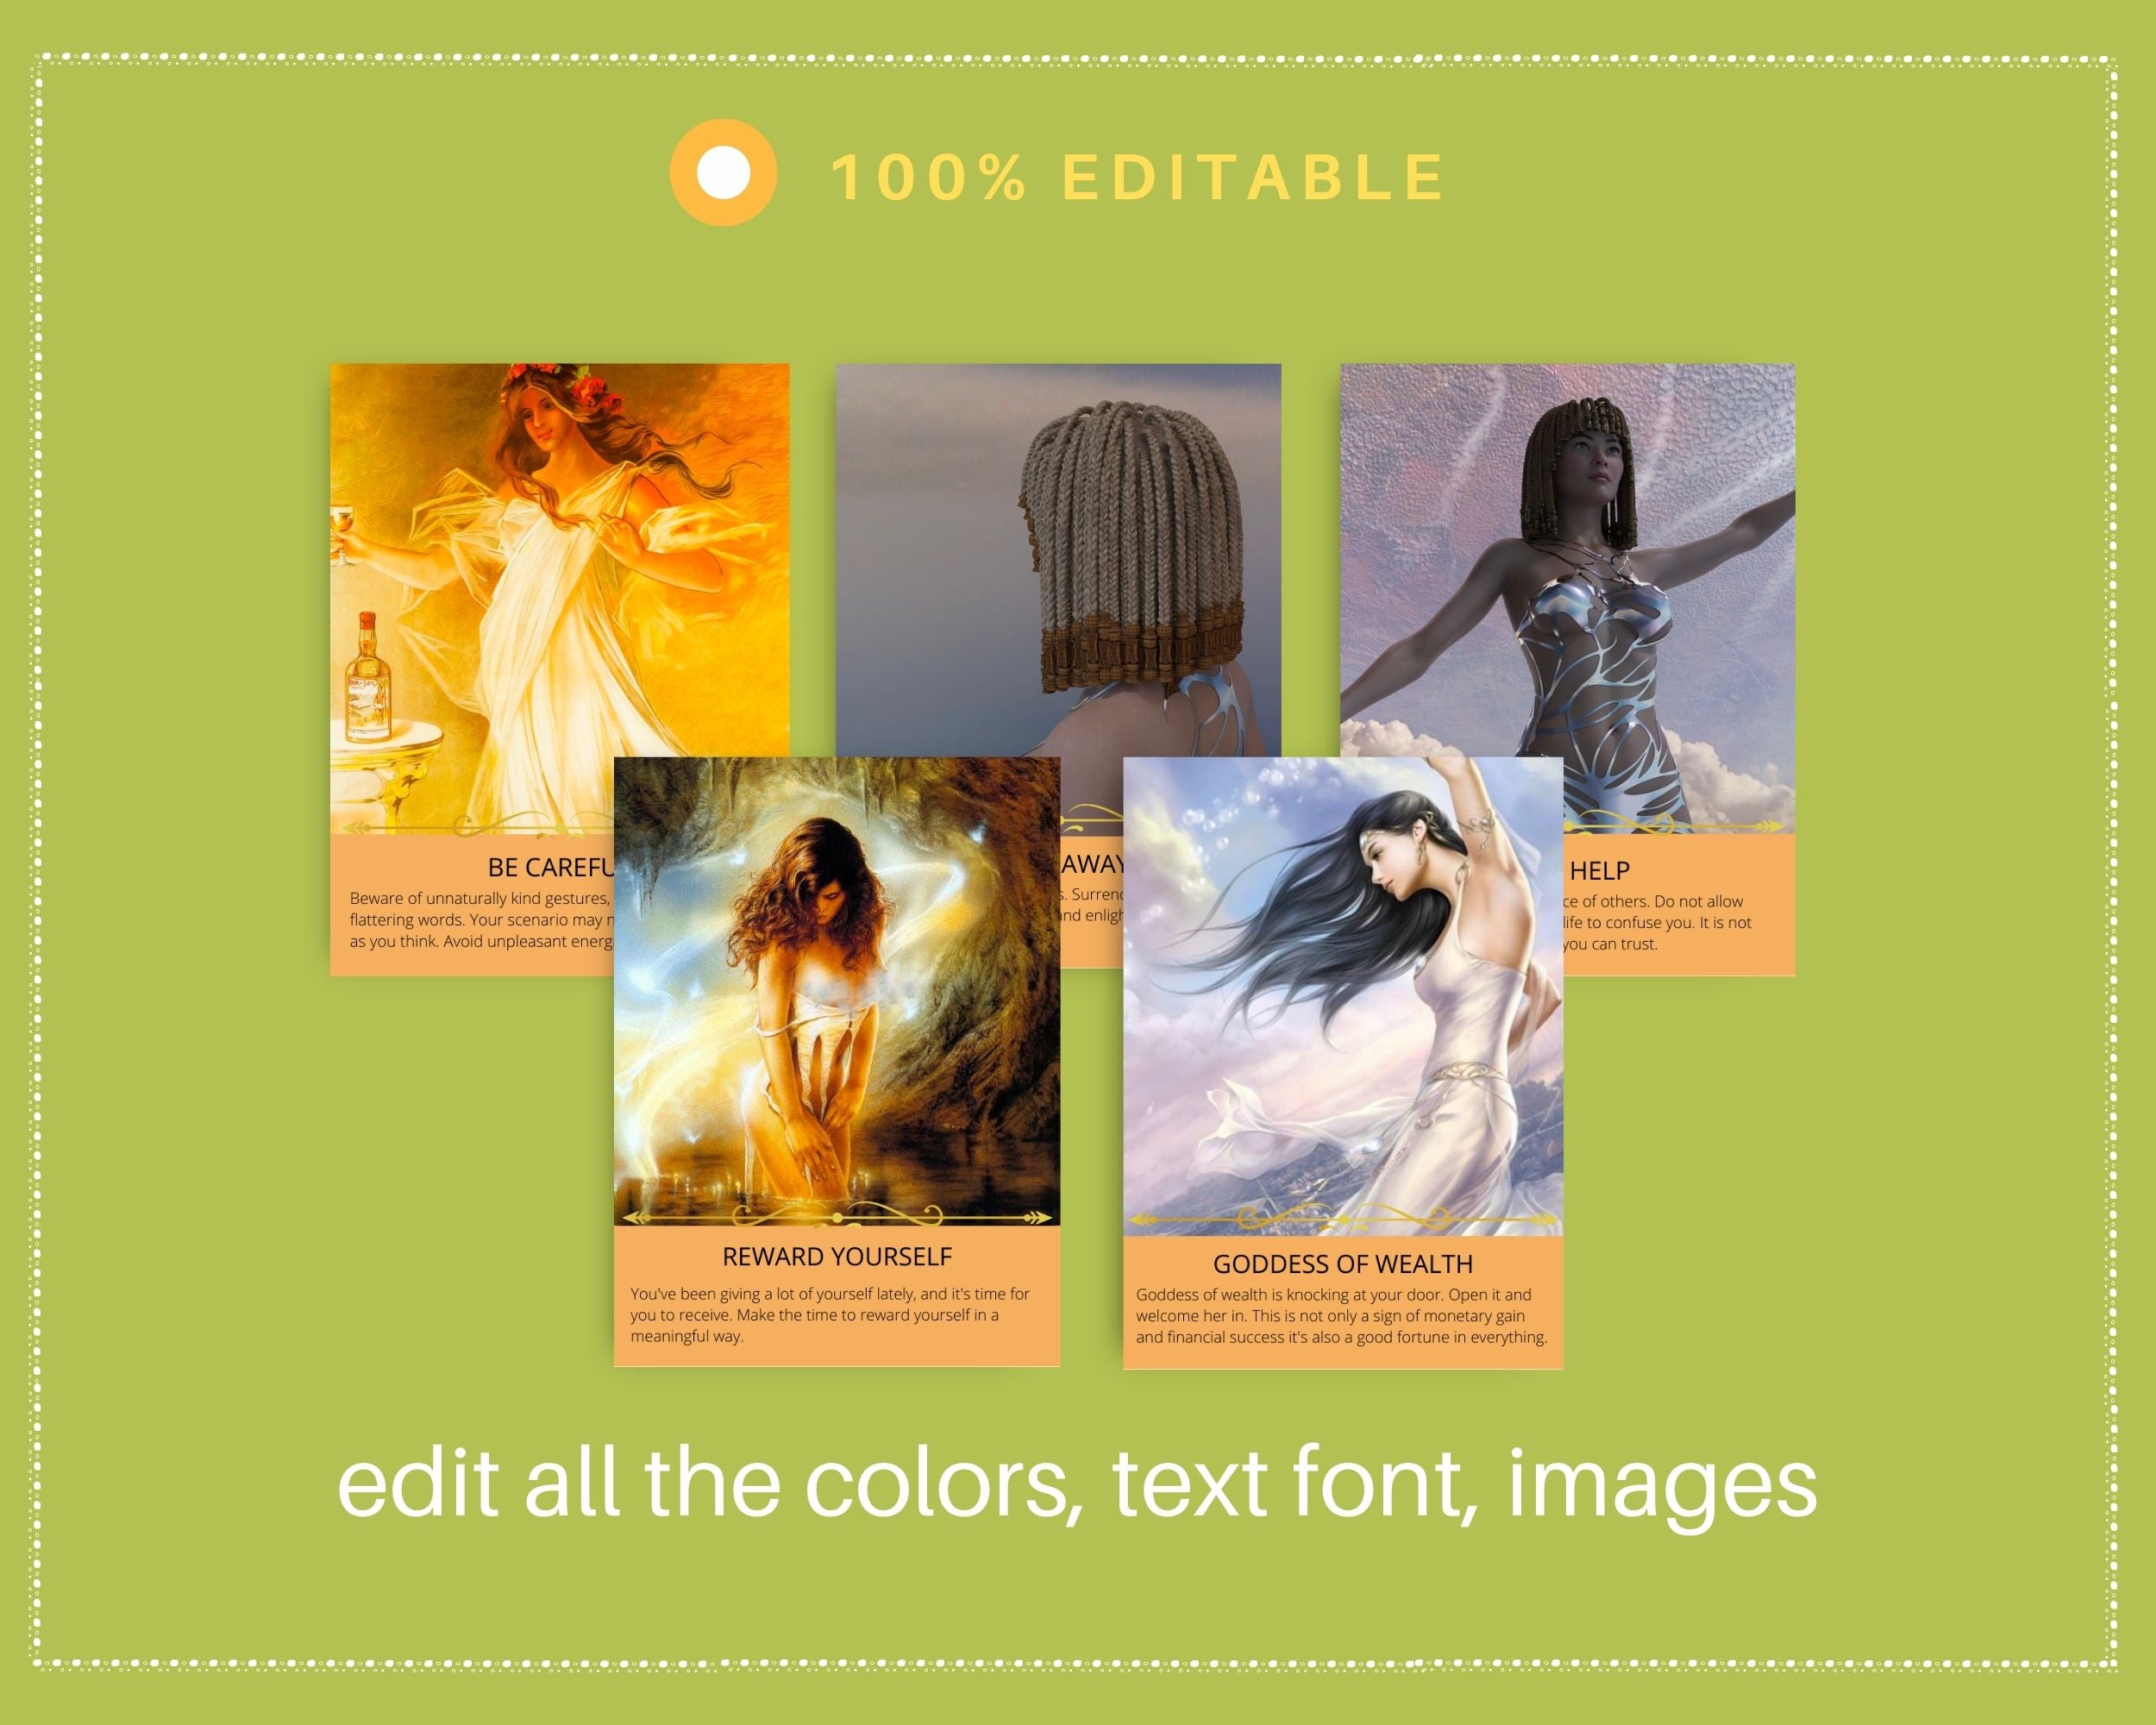 Goddess Lady Boss Oracle Card Deck | Editable 20 Card Deck in Canva | Size 2"x 2.7" | Commercial Use